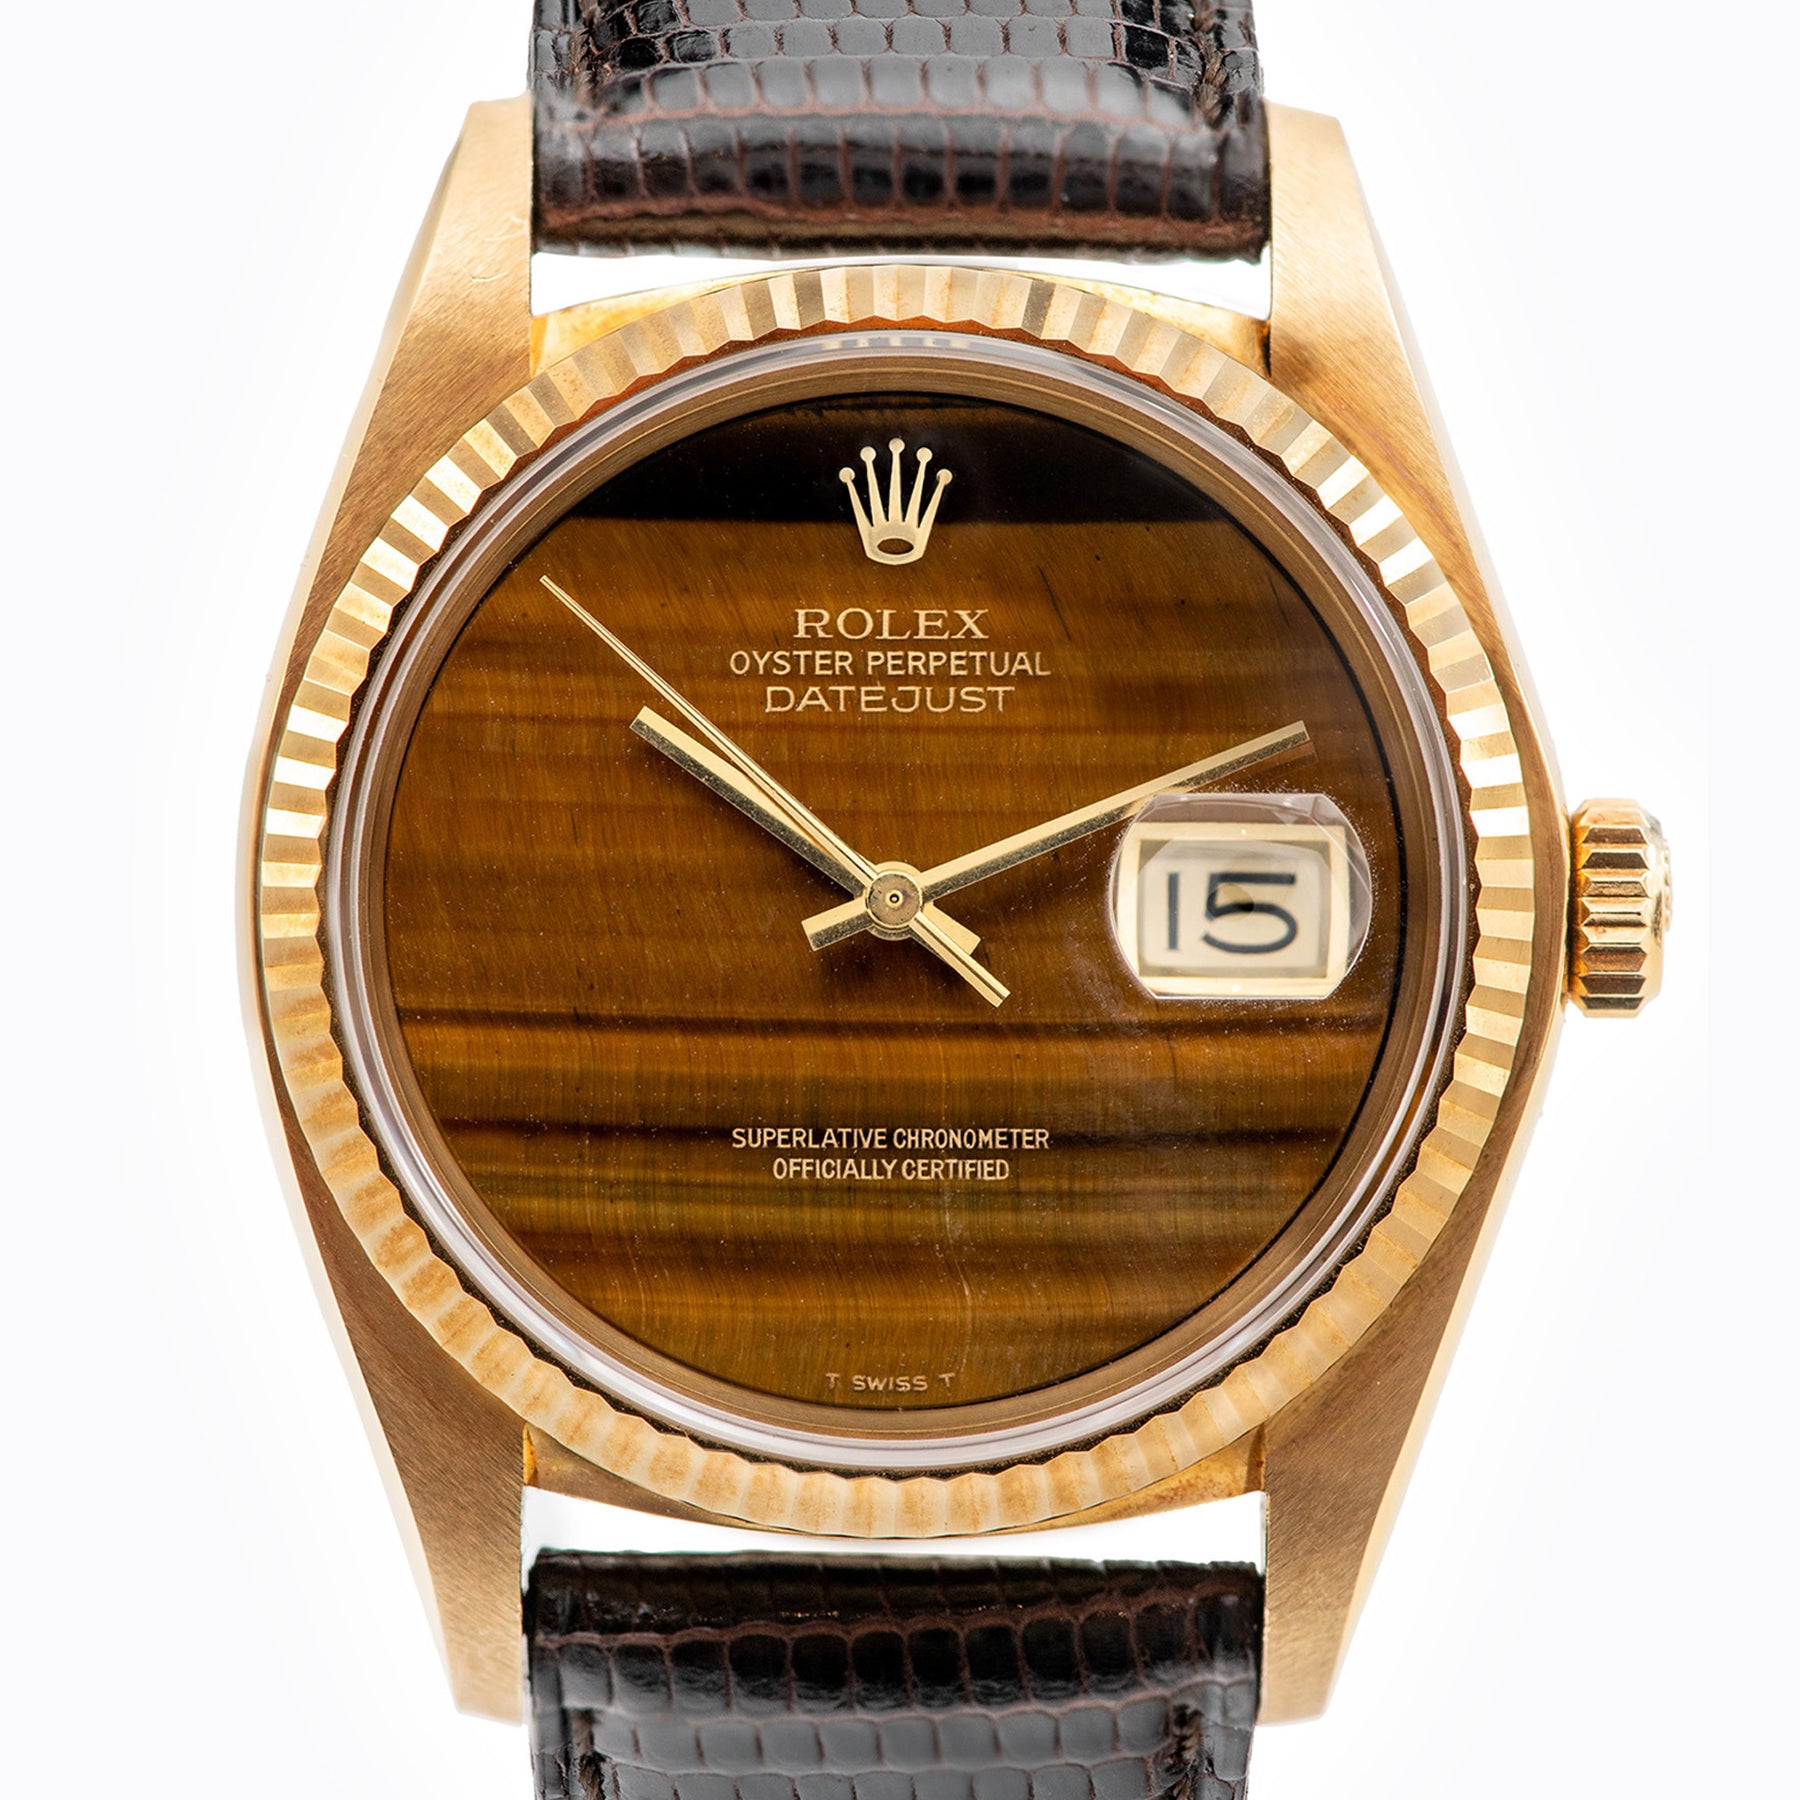 1979 Rolex Datejust Tiger Eye Ref. 16018 (with papers)